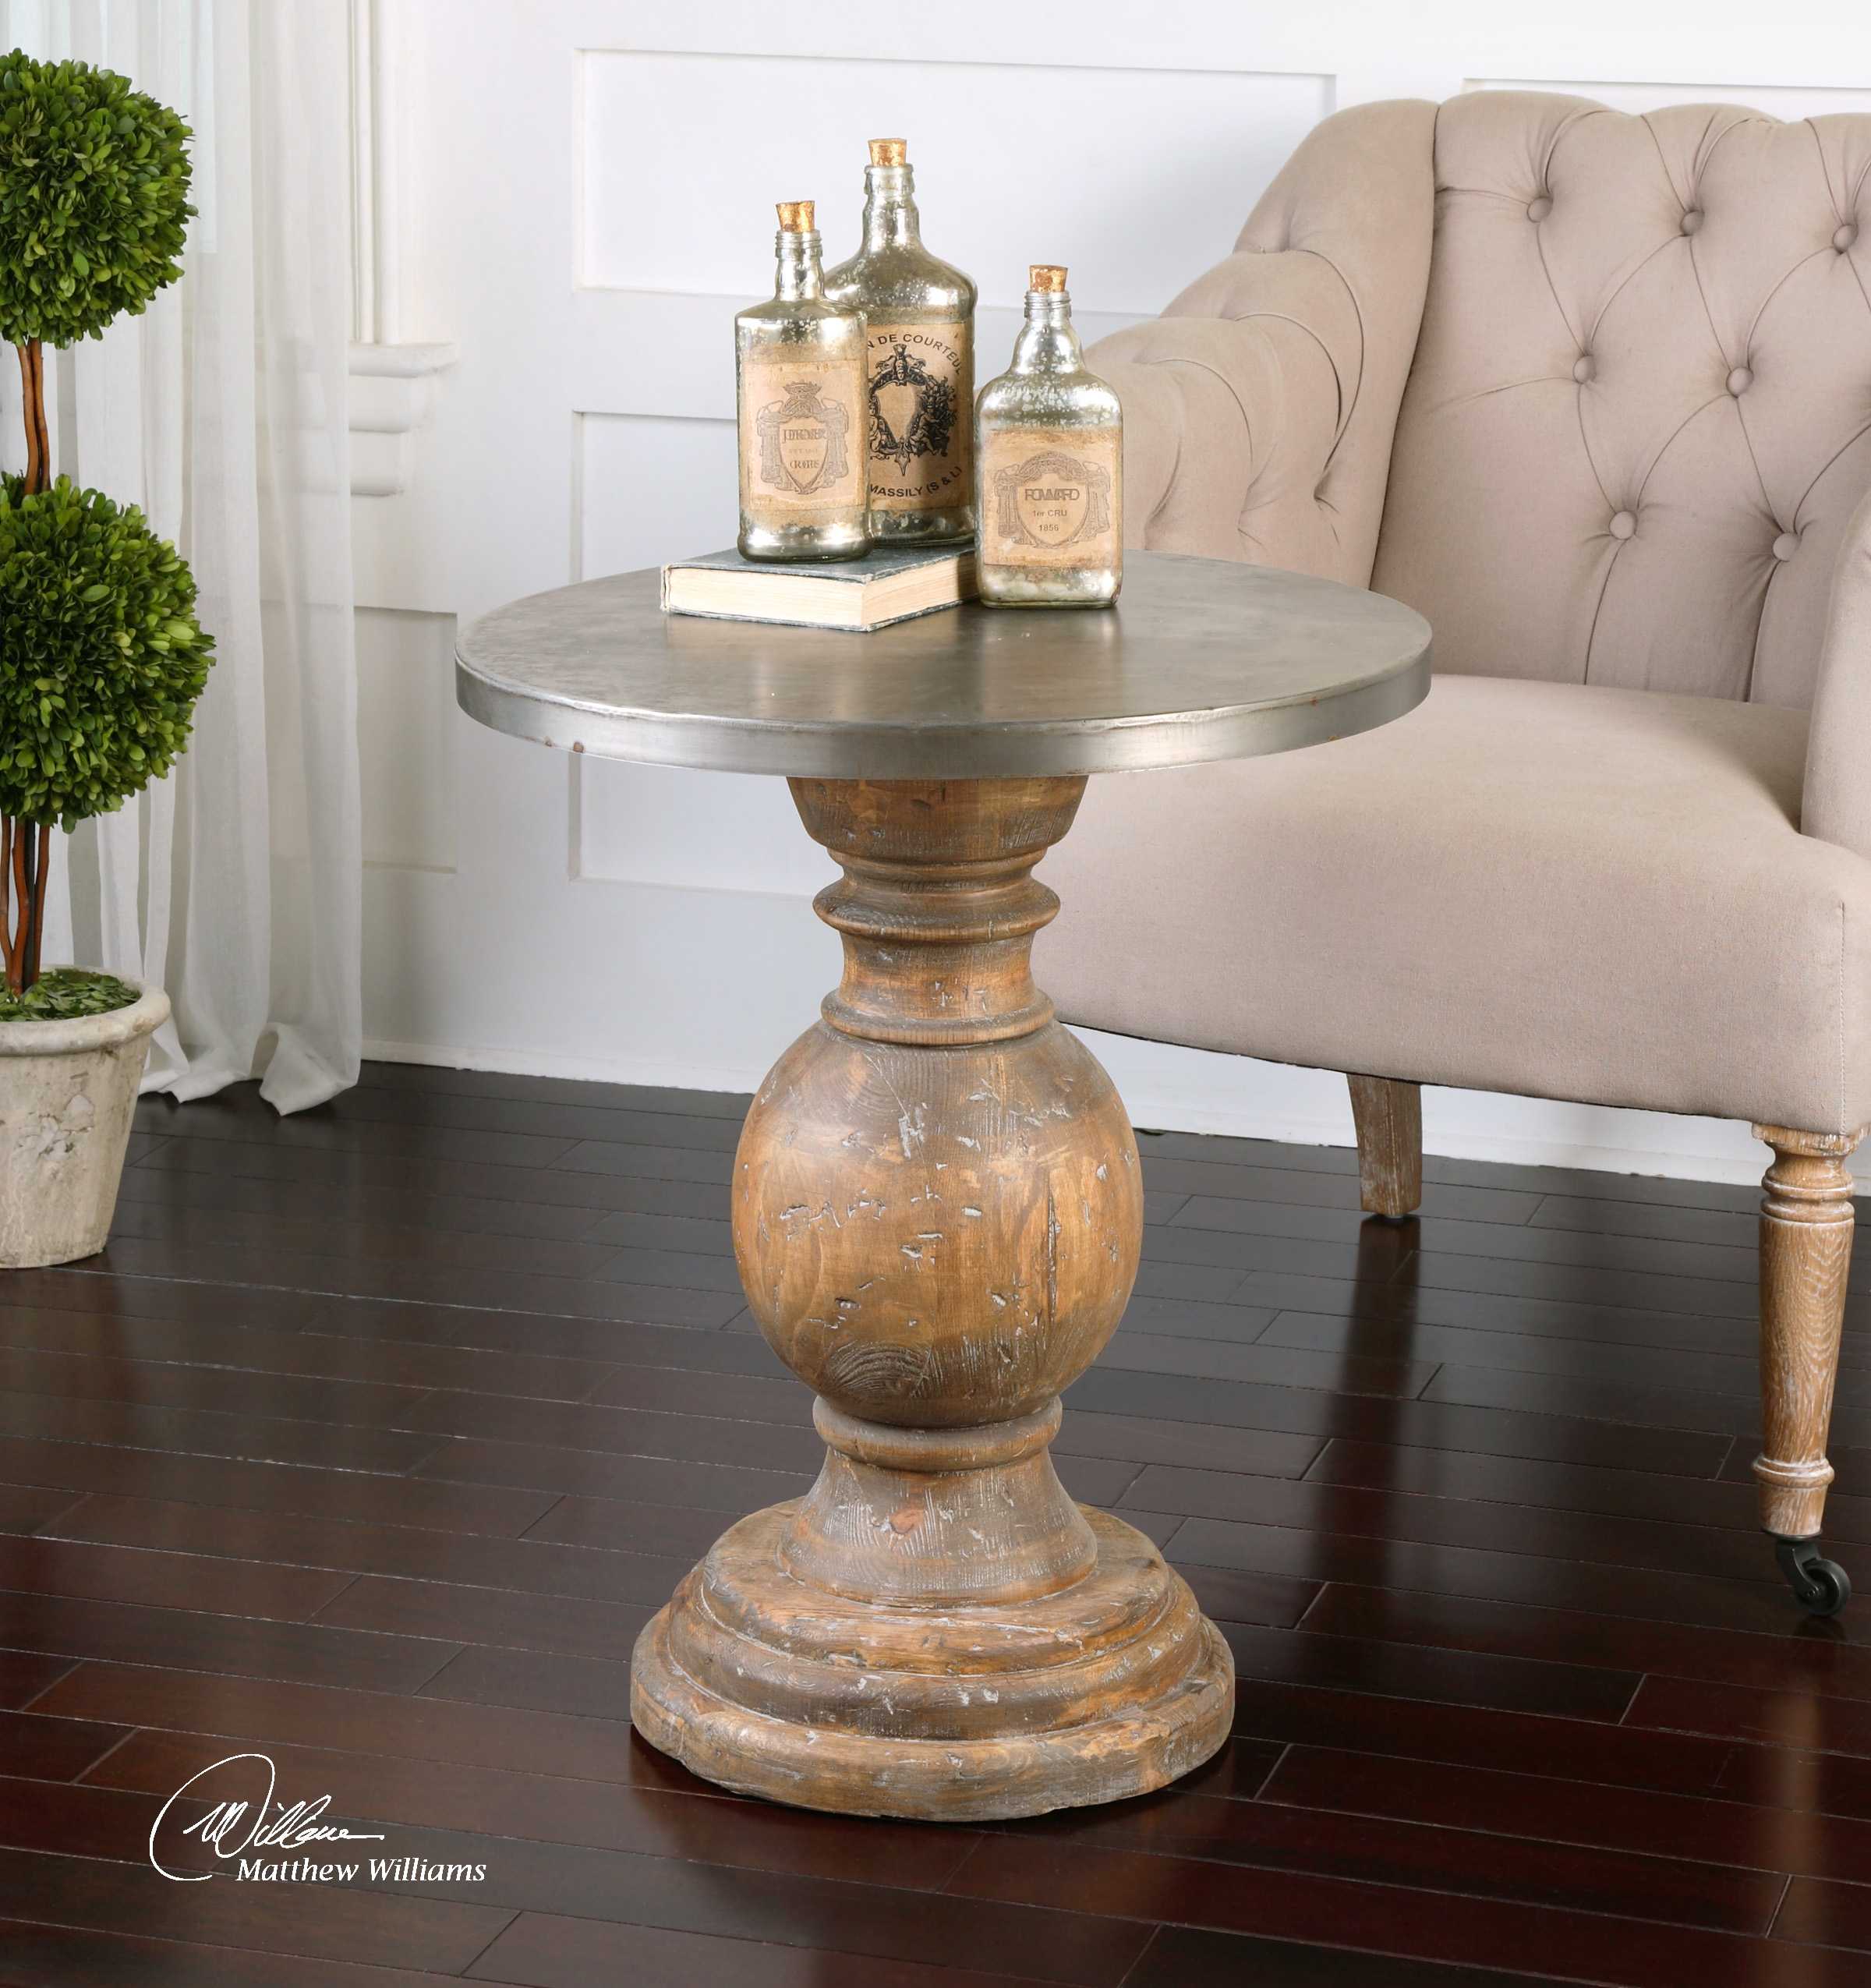 uttermost blythe wooden accent table orange lamp contemporary tables concrete bench seat bunnings octagon side mirrored hall silver metal console cantilever patio umbrellas narrow